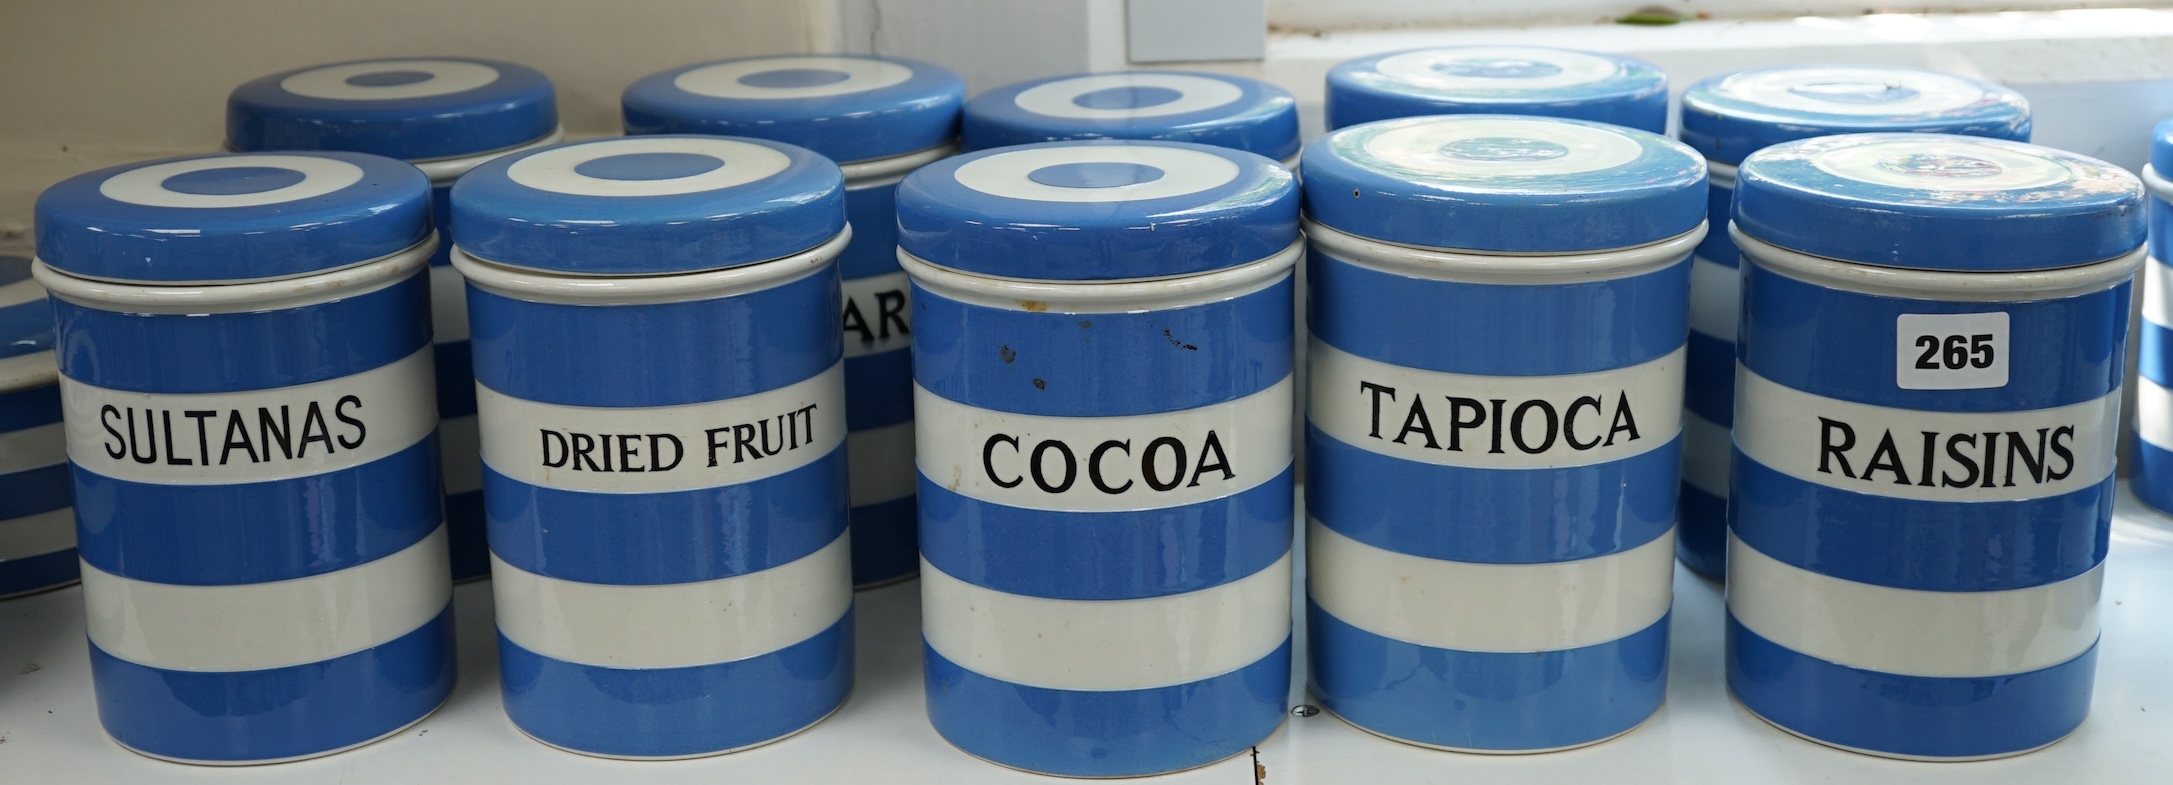 T.G.Green Cornish Kitchenware, ten 17cm lidded storage jars to include Tapioca, Dried Fruit, Sultanas, Lump Sugar and Flour, Black Shield marks. Condition - fair to good